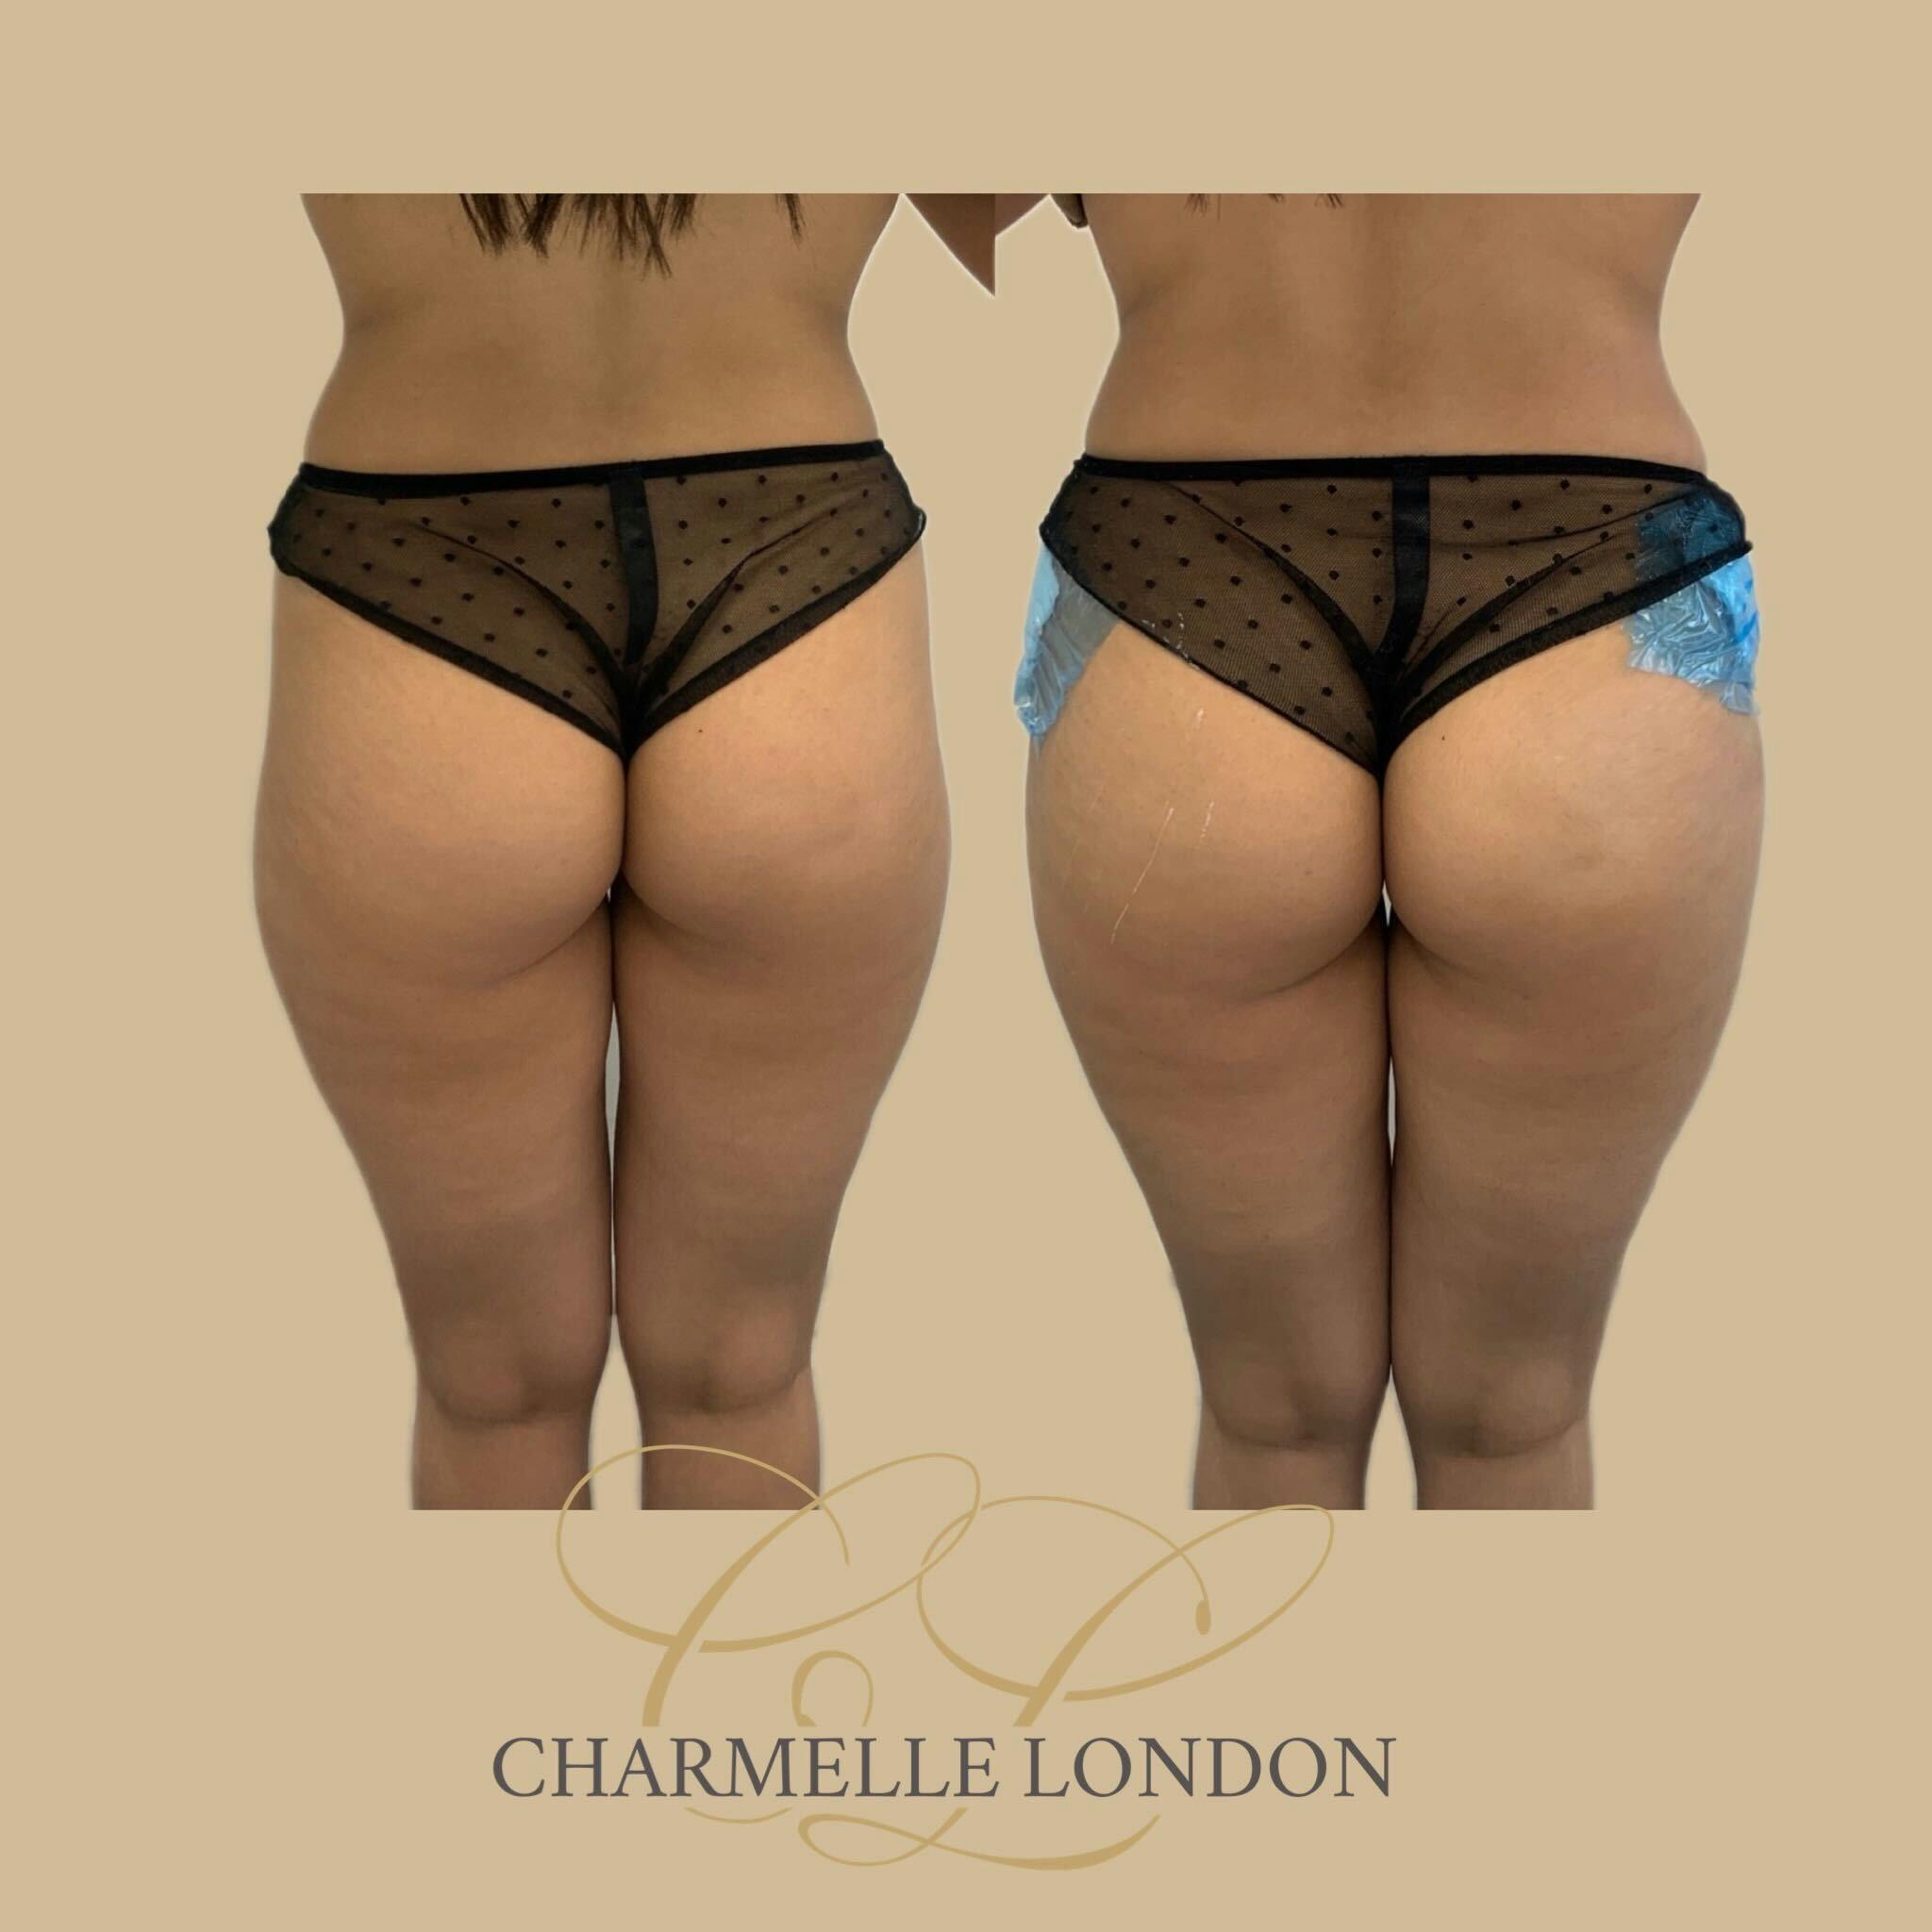  Create proportion, reshape the buttocks, add volume to the hips, and fill in hip dips. Buttock fillers are an easier way to get the buttock shape you want, without surgery.